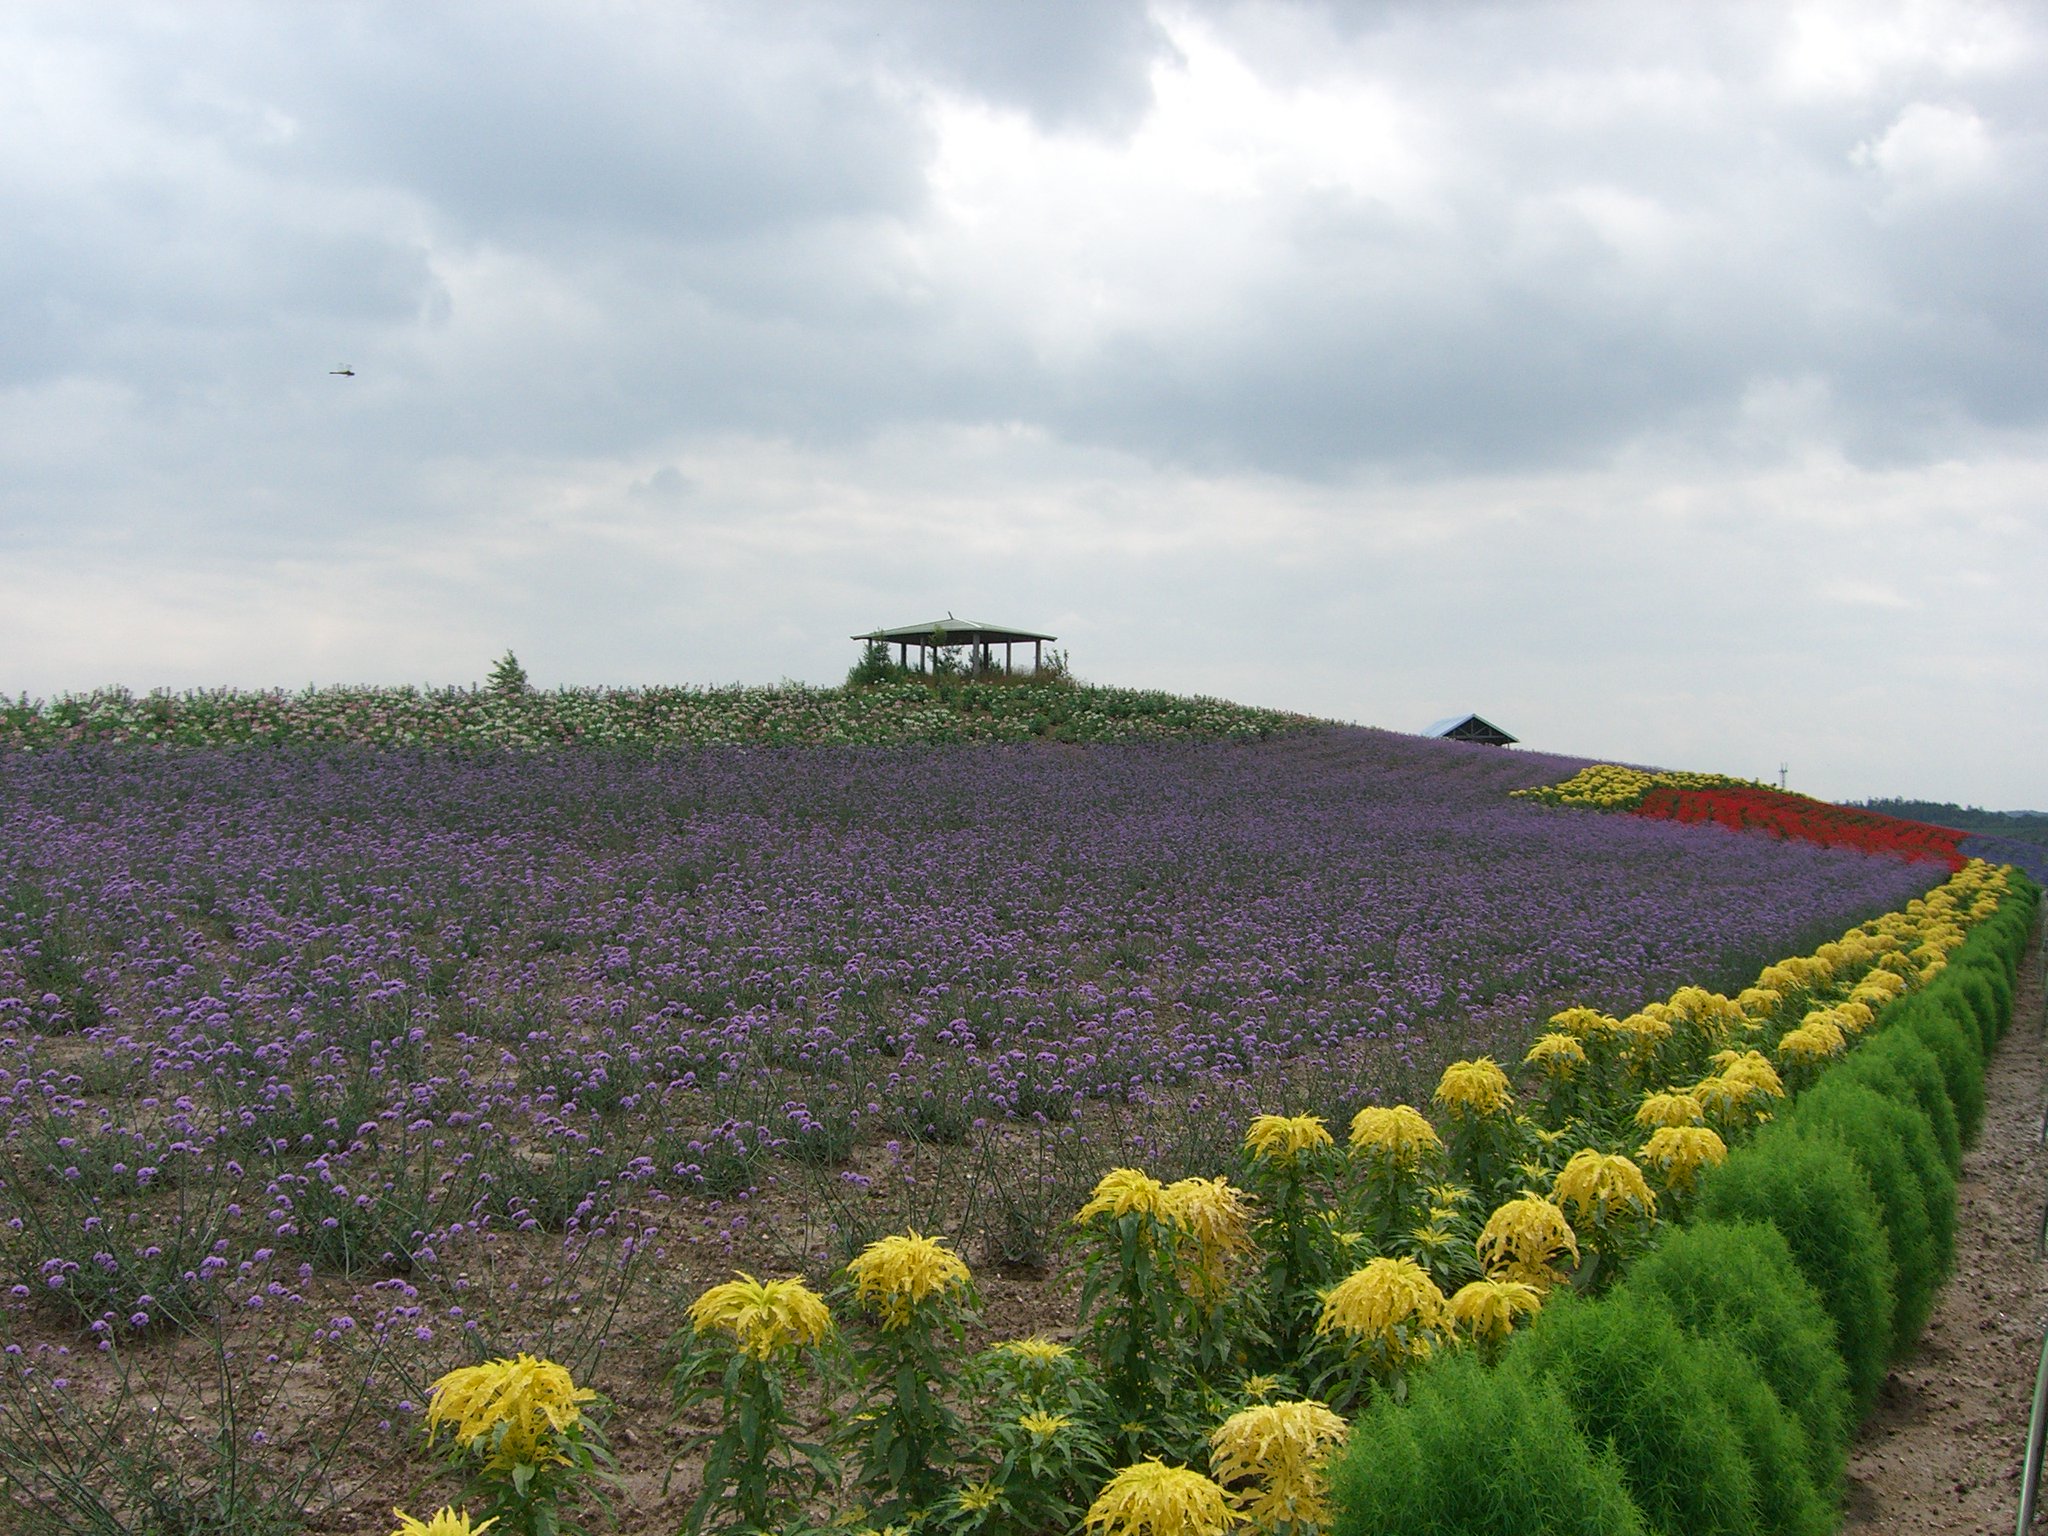 A flower field in Hokkaido. Closest to the photographer are yellow flowers with long petals, and behind those are purple flowers with short petals. Far away are white, pink, and red flowers.